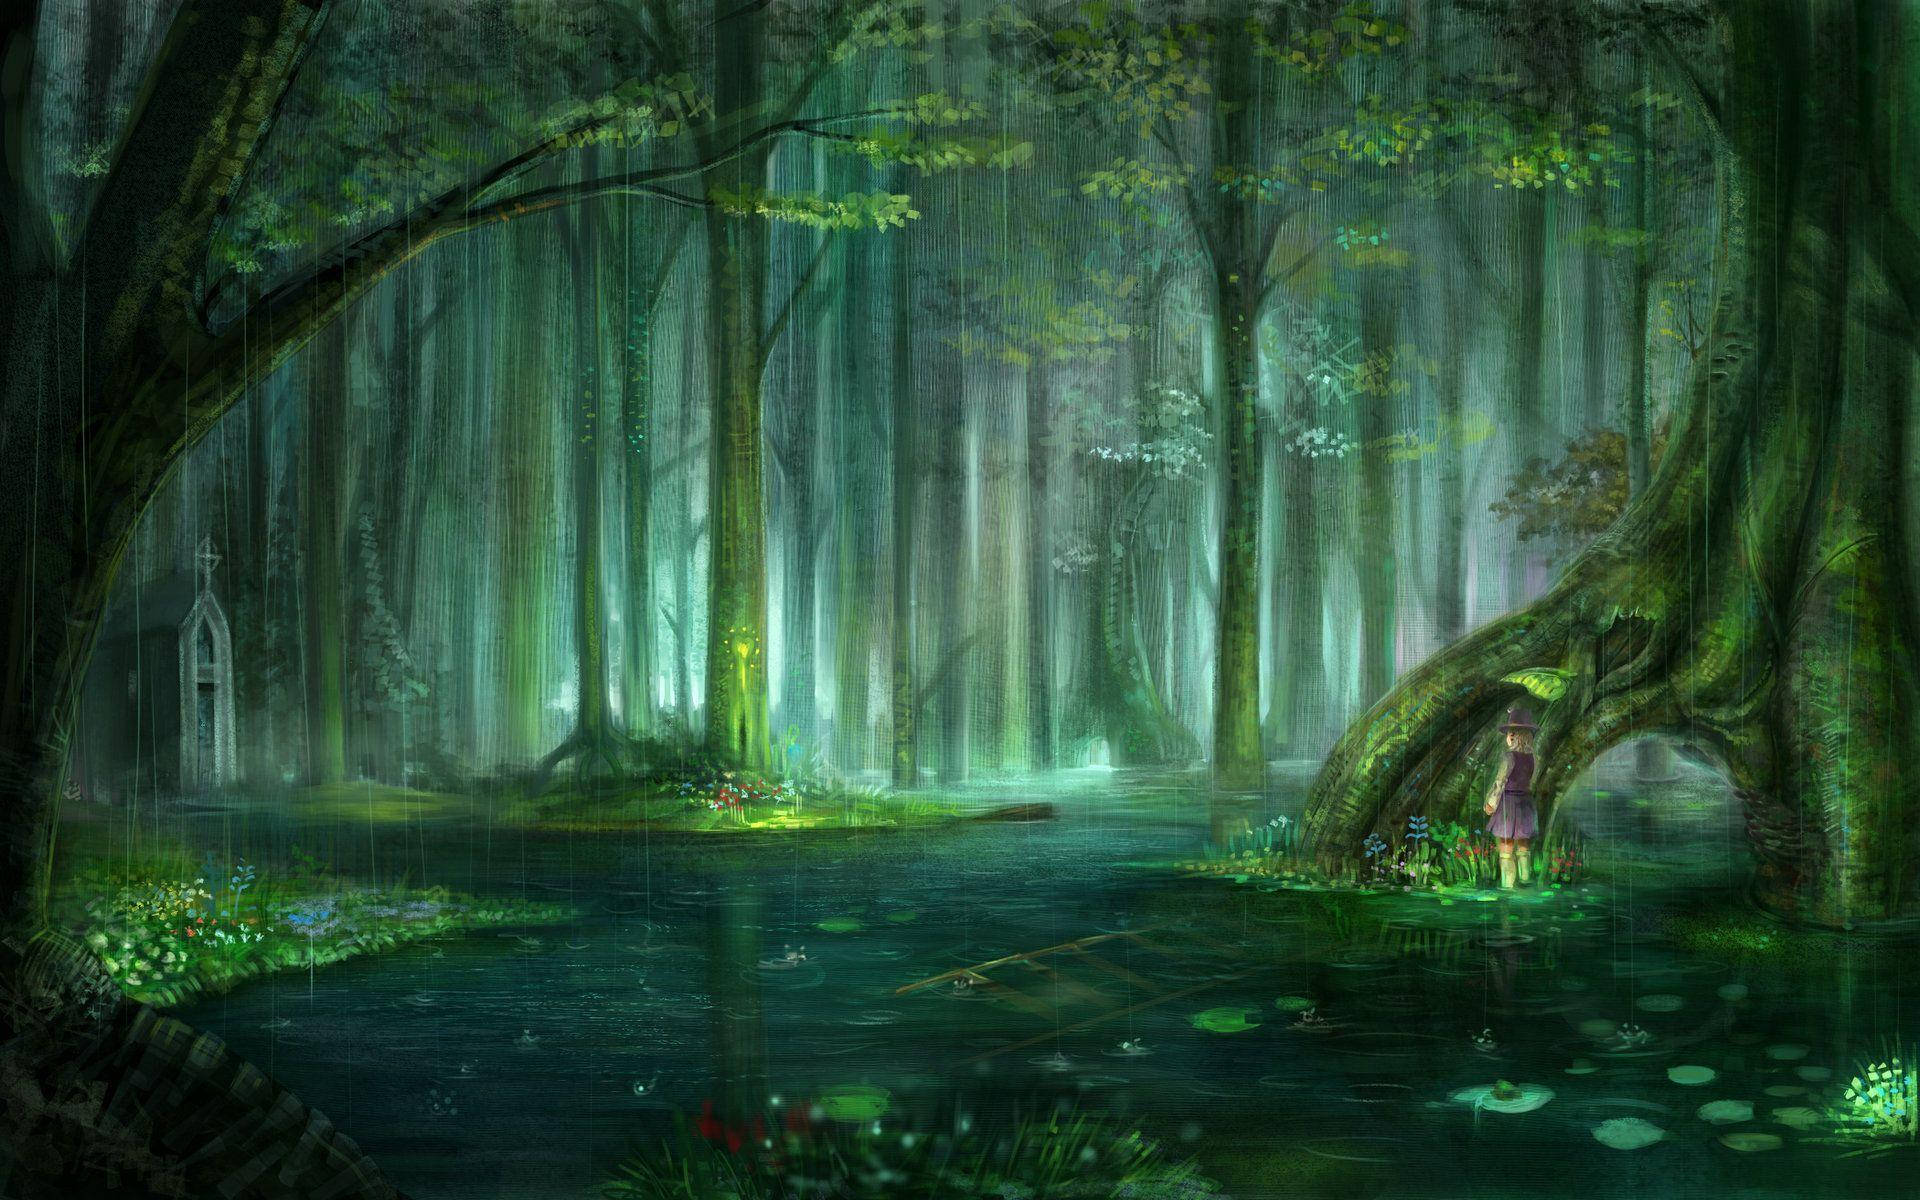 Rainy Day In An Enchanted Forest Wallpaper